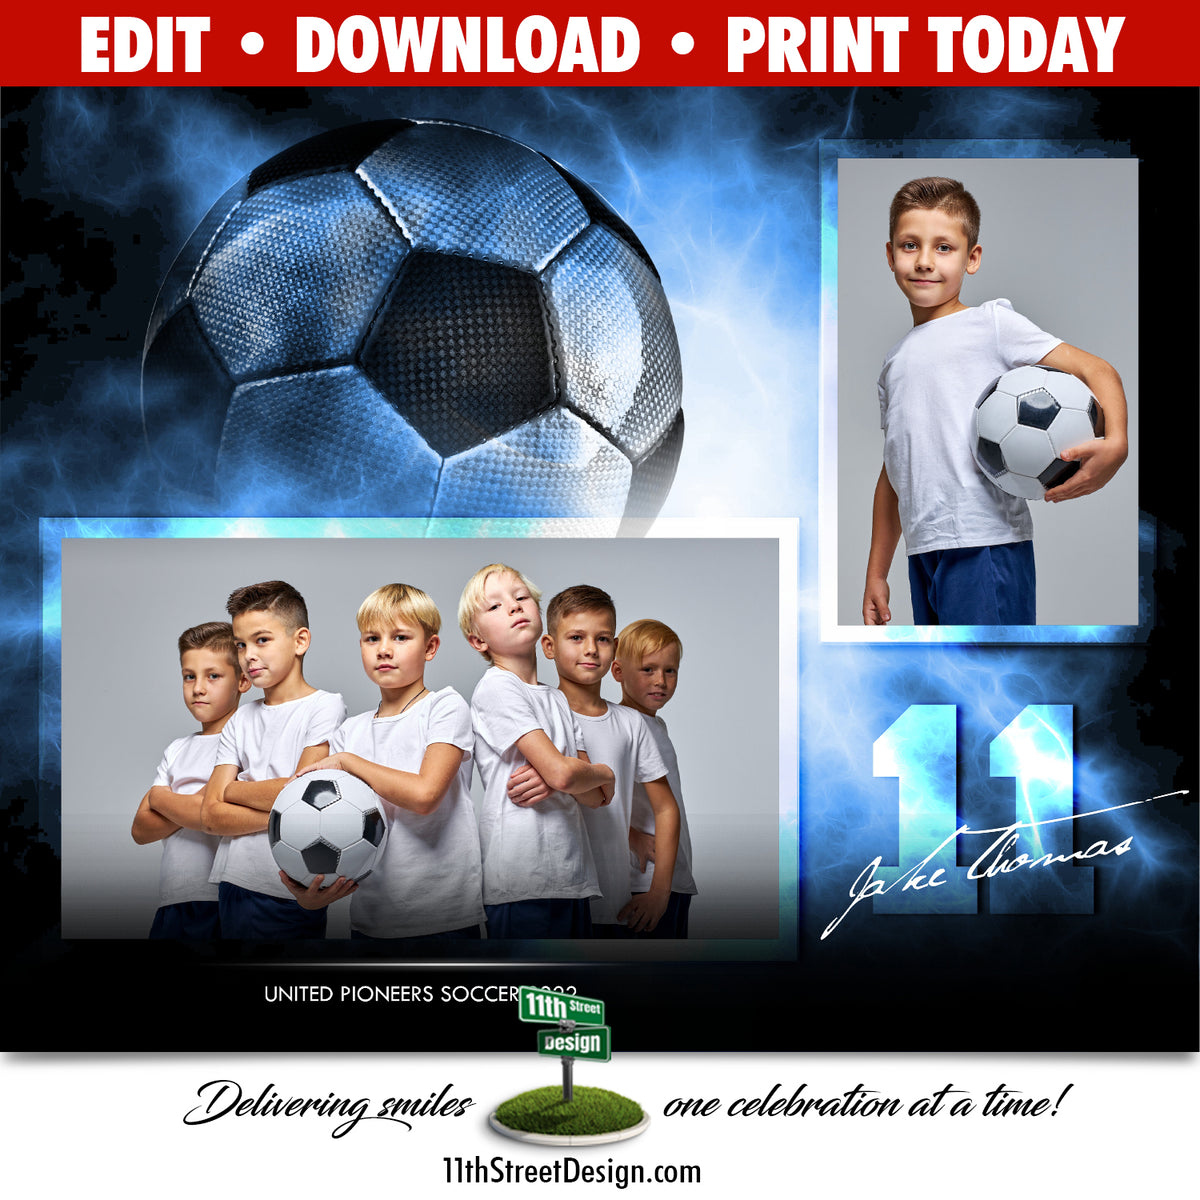 Soccer Memory Mates • Online Editable 8x10 Sport Team Photo Template • Print Today • Digital Download • DIY Printable • Electric Explosion